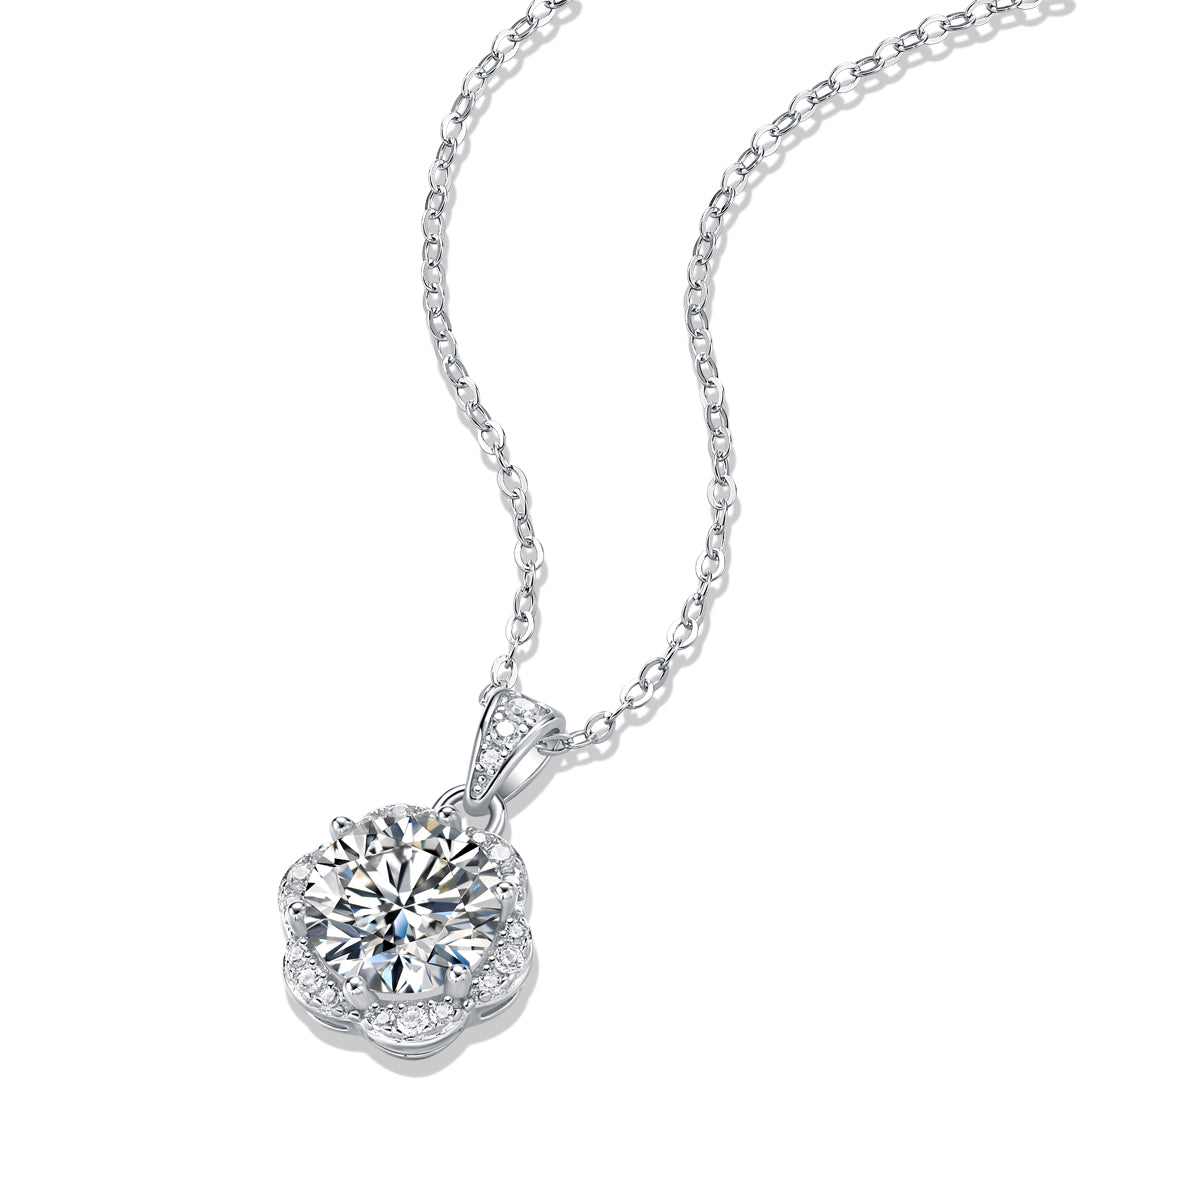 FairyLocus “Blossom” 2ct Moissanite Necklace Sterling Silver 18K White Gold Plated D Color VVS1 Clarity Brilliant Necklace FLZZNLMS22 FairyLocus